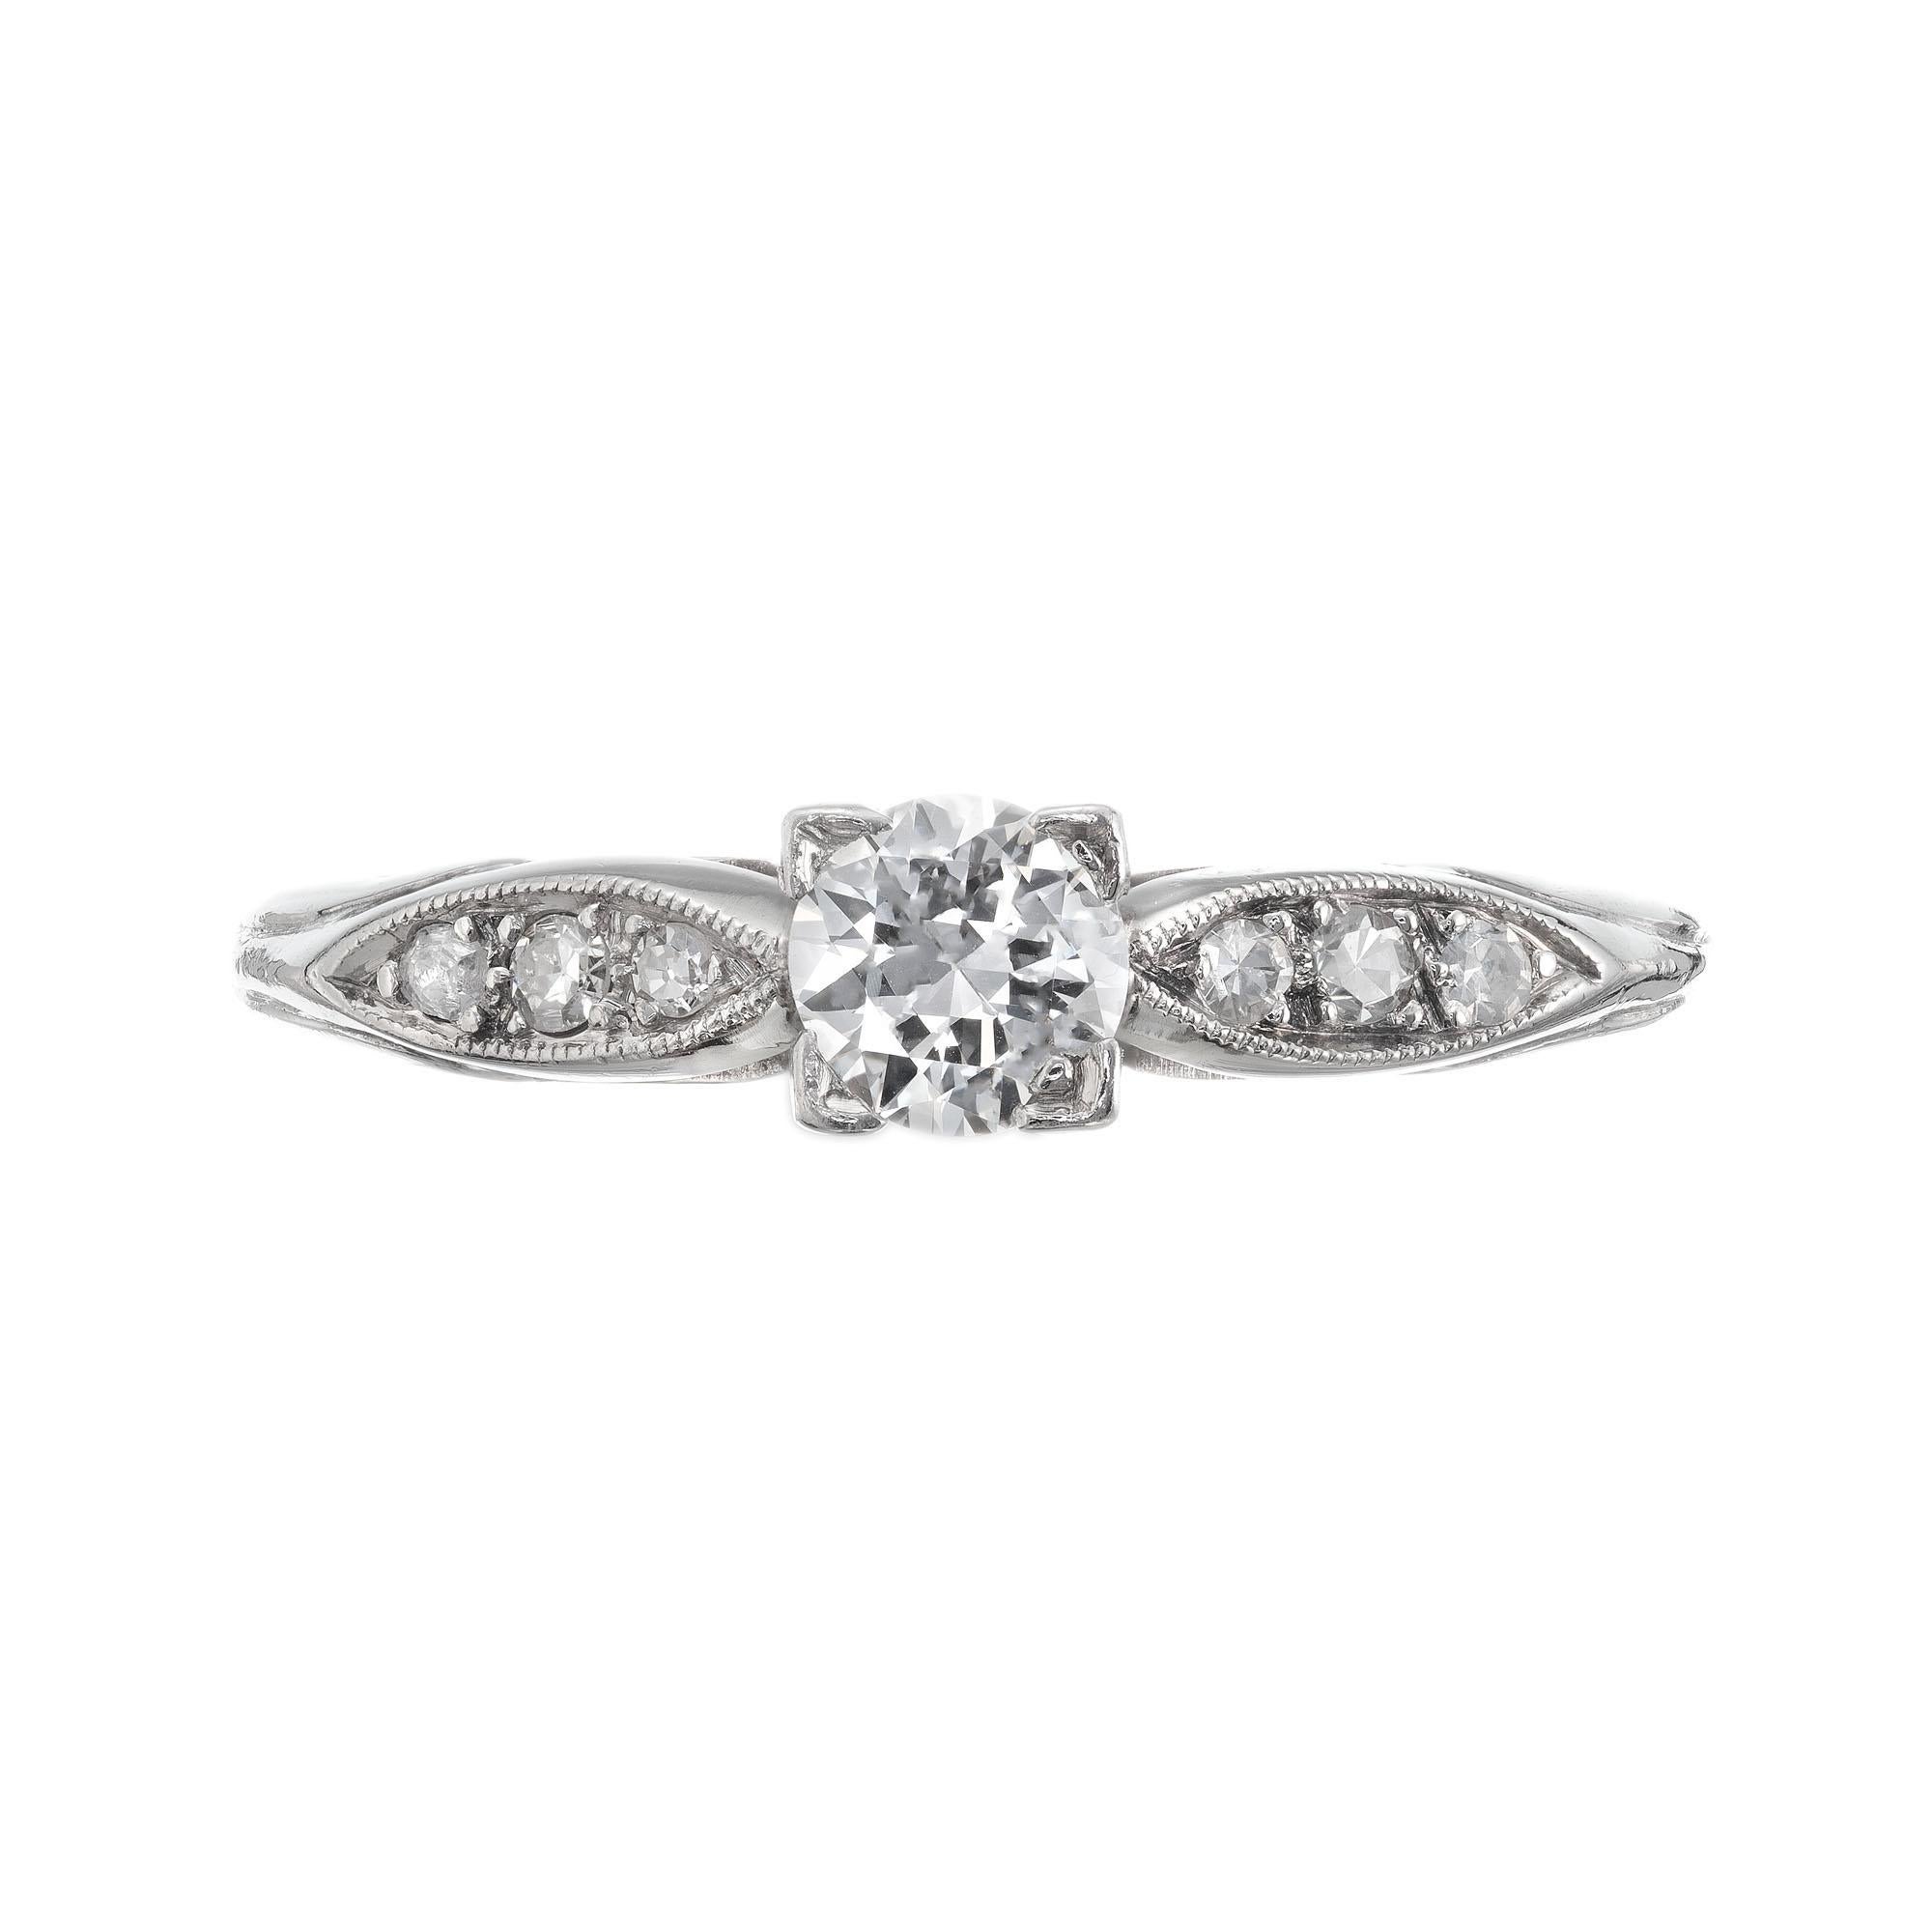 1940's late Art Deco transitional diamond engagement ring with six side diamonds in it's original platinum setting. EGL certified. 

1 Transitional brilliant cut diamond, approx. total weight .26cts, E, VS2, Depth: 57.3%, Table: 62%. EGL #